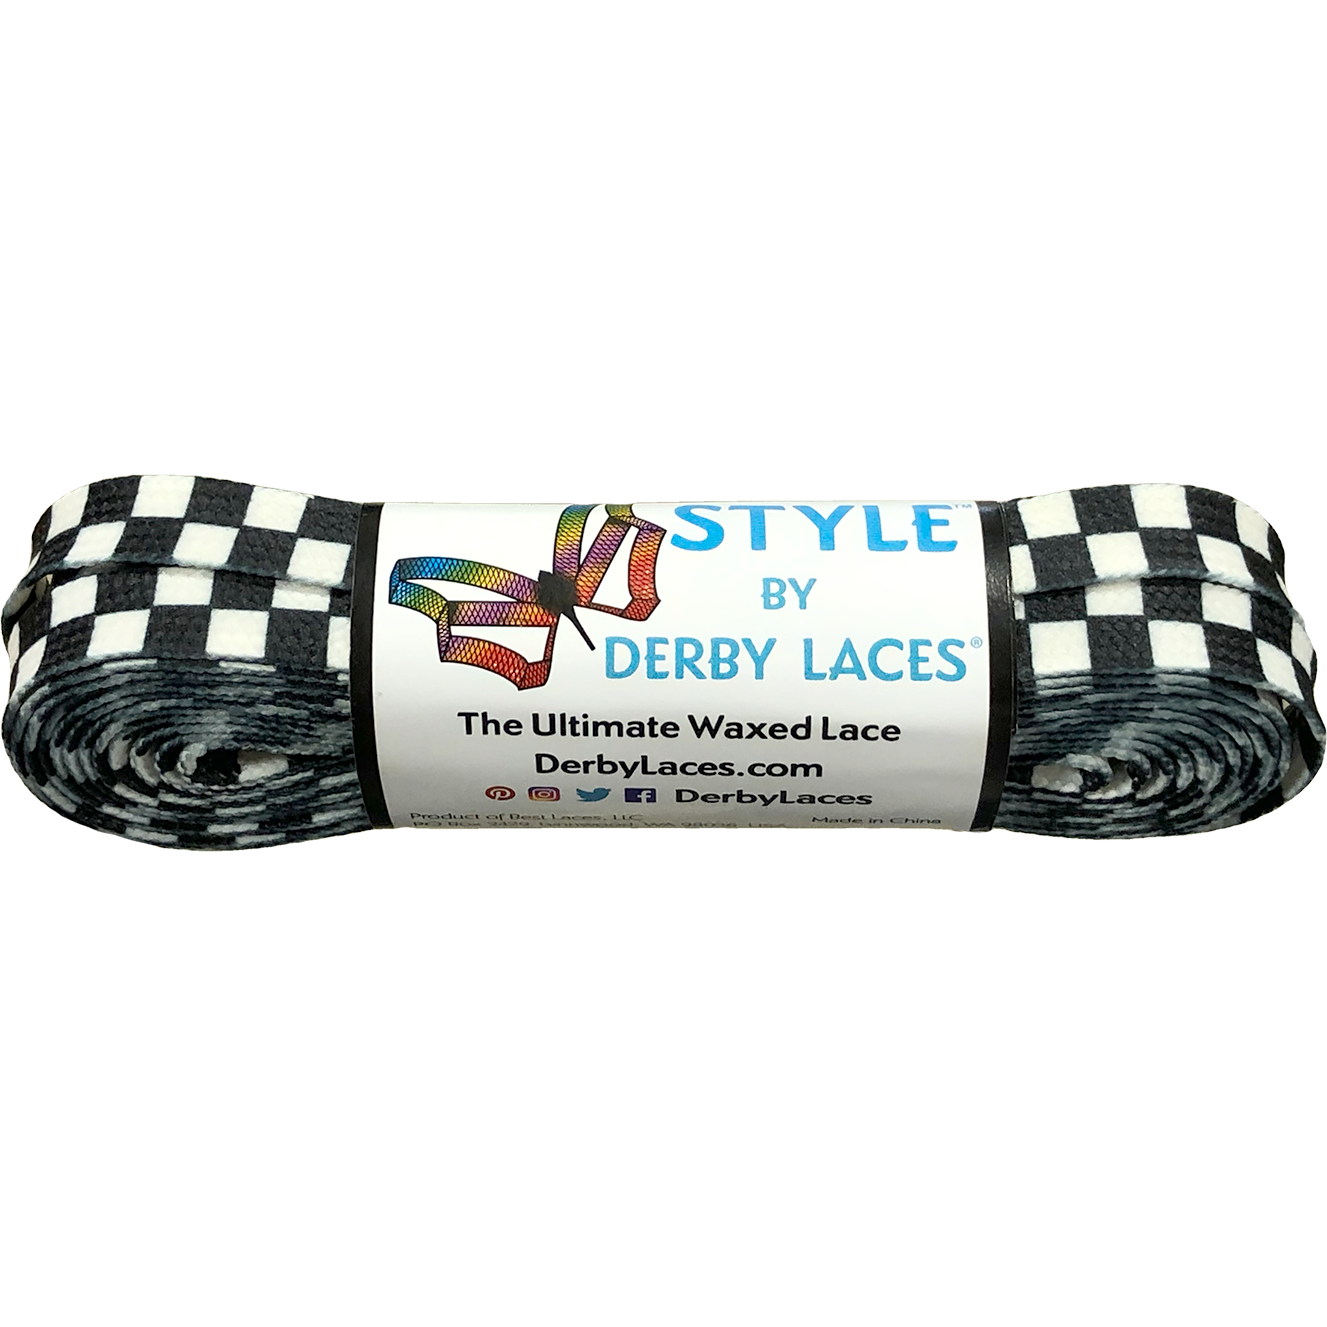 STYLE by Derby Laces – Checkered Black and White 213cm